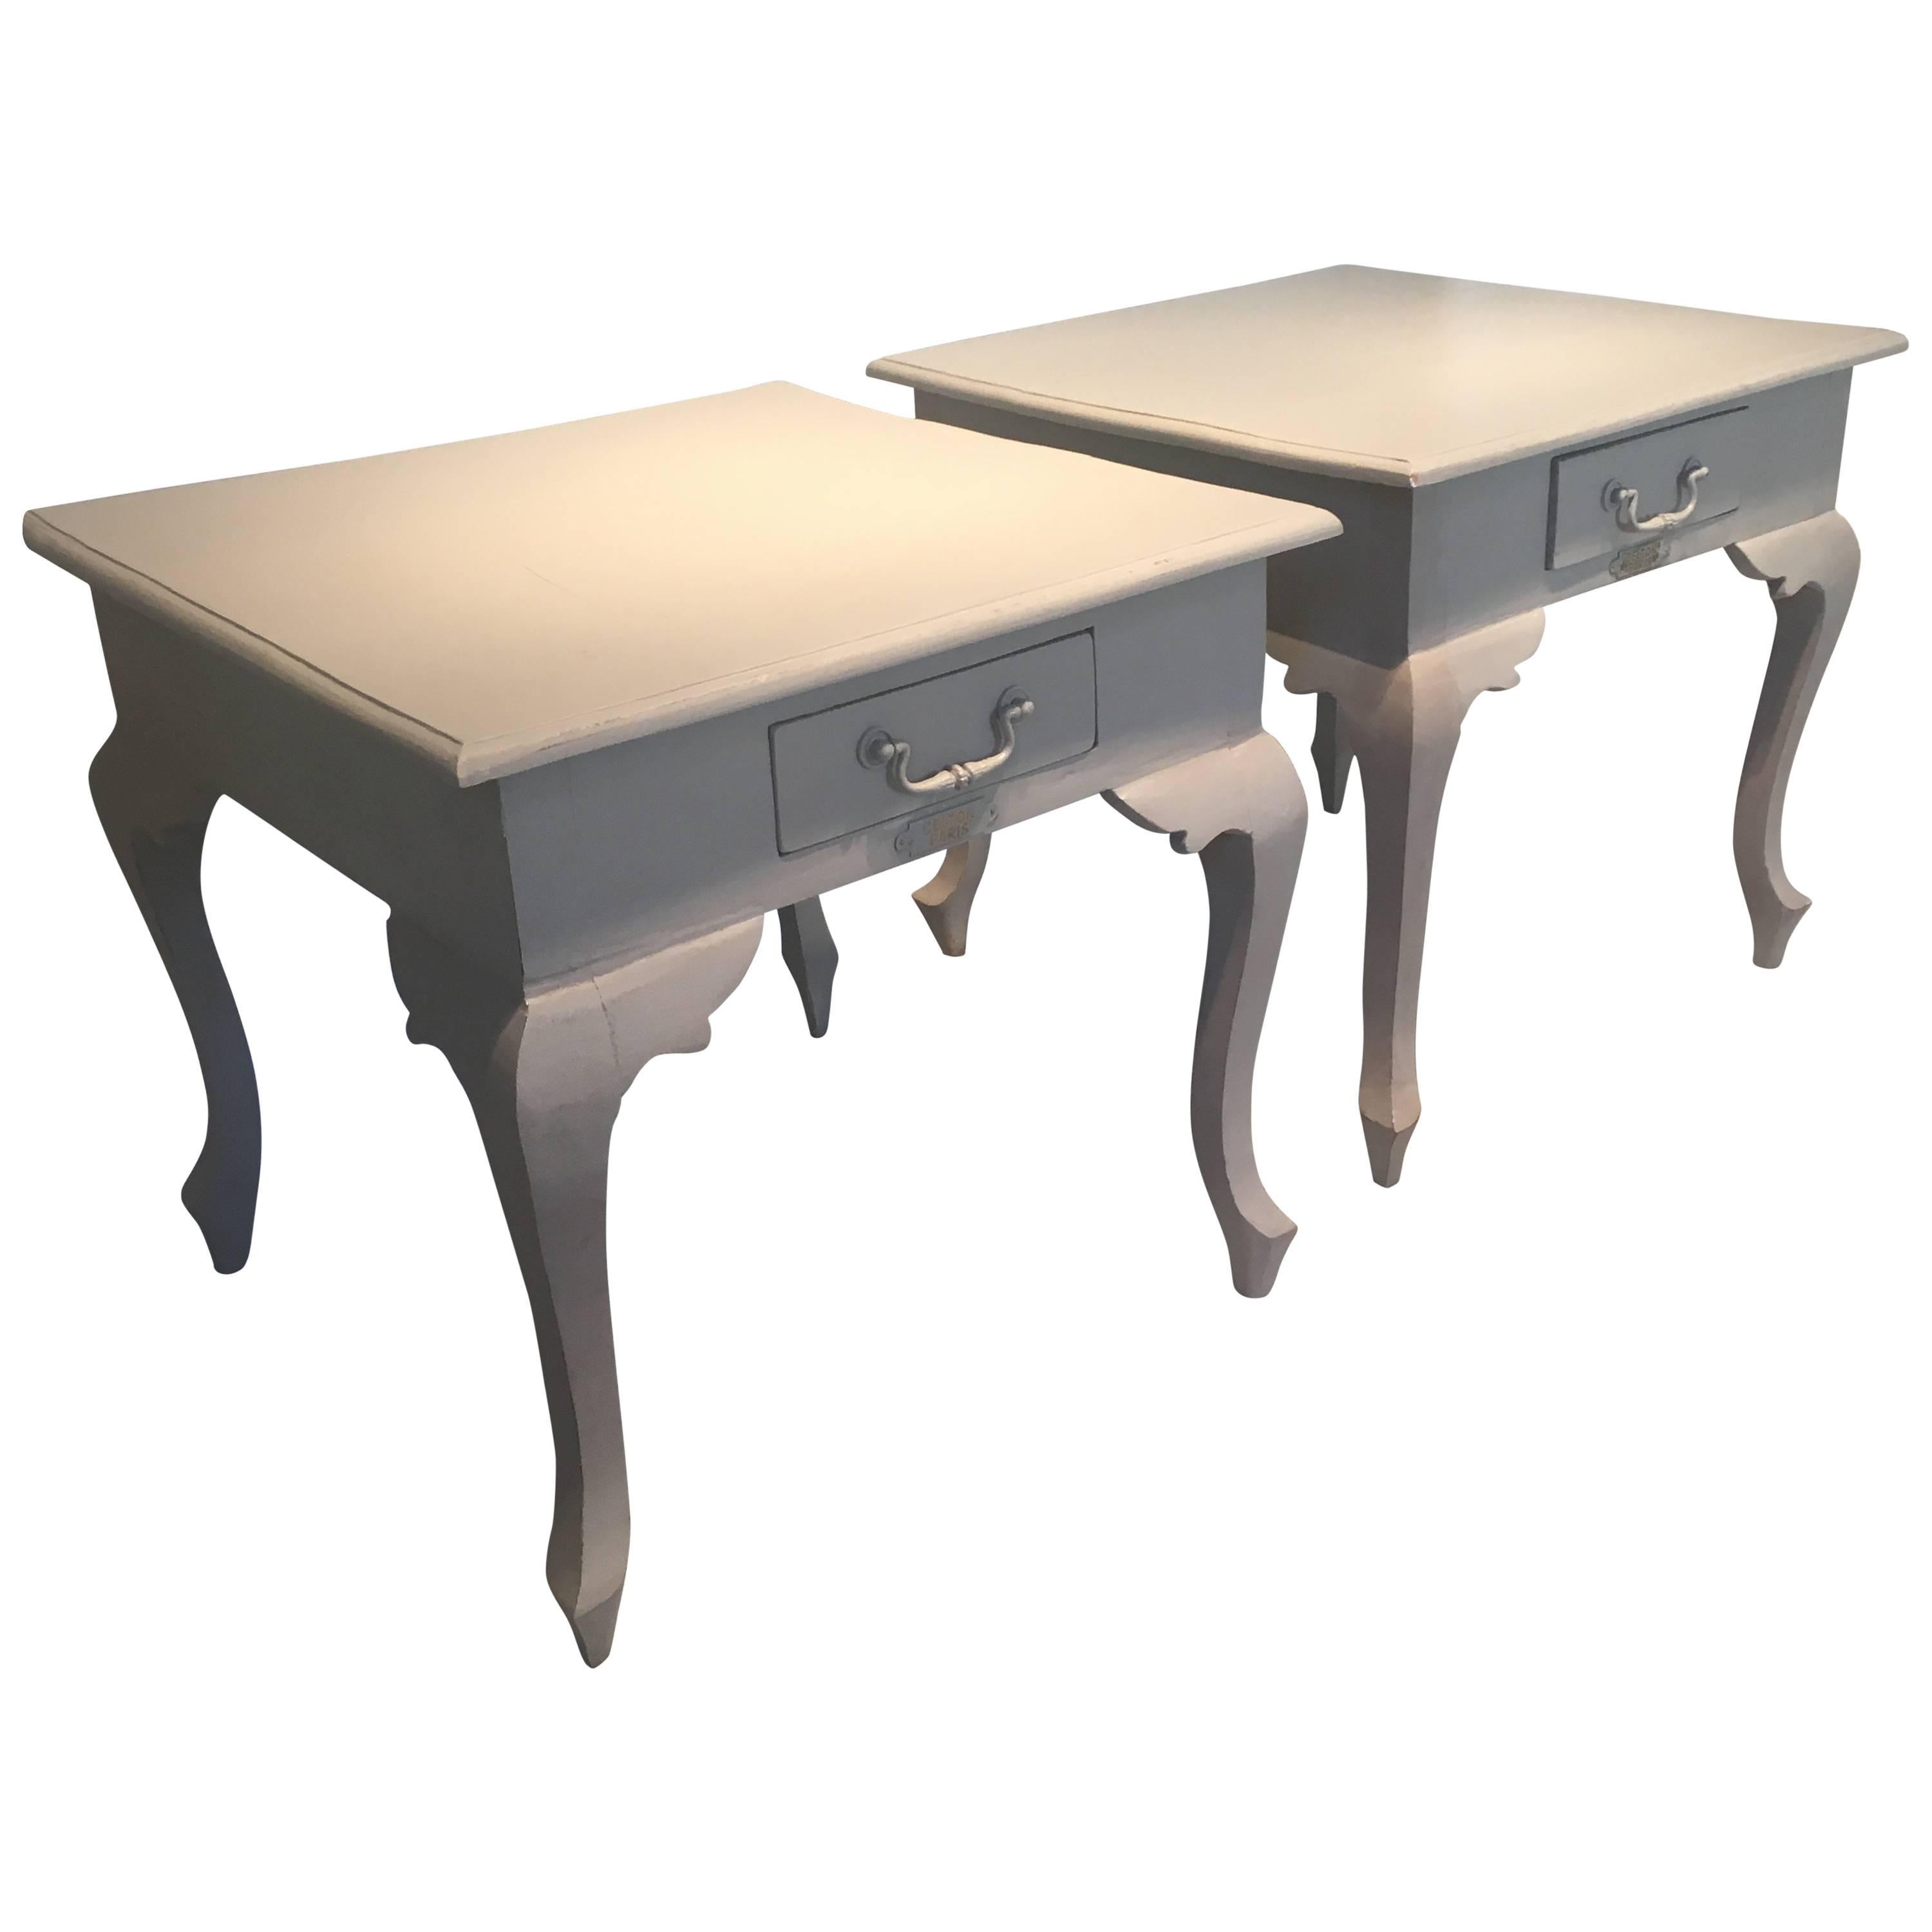 Pair of French Painted Side Tables, Signed "Gelton, Paris"